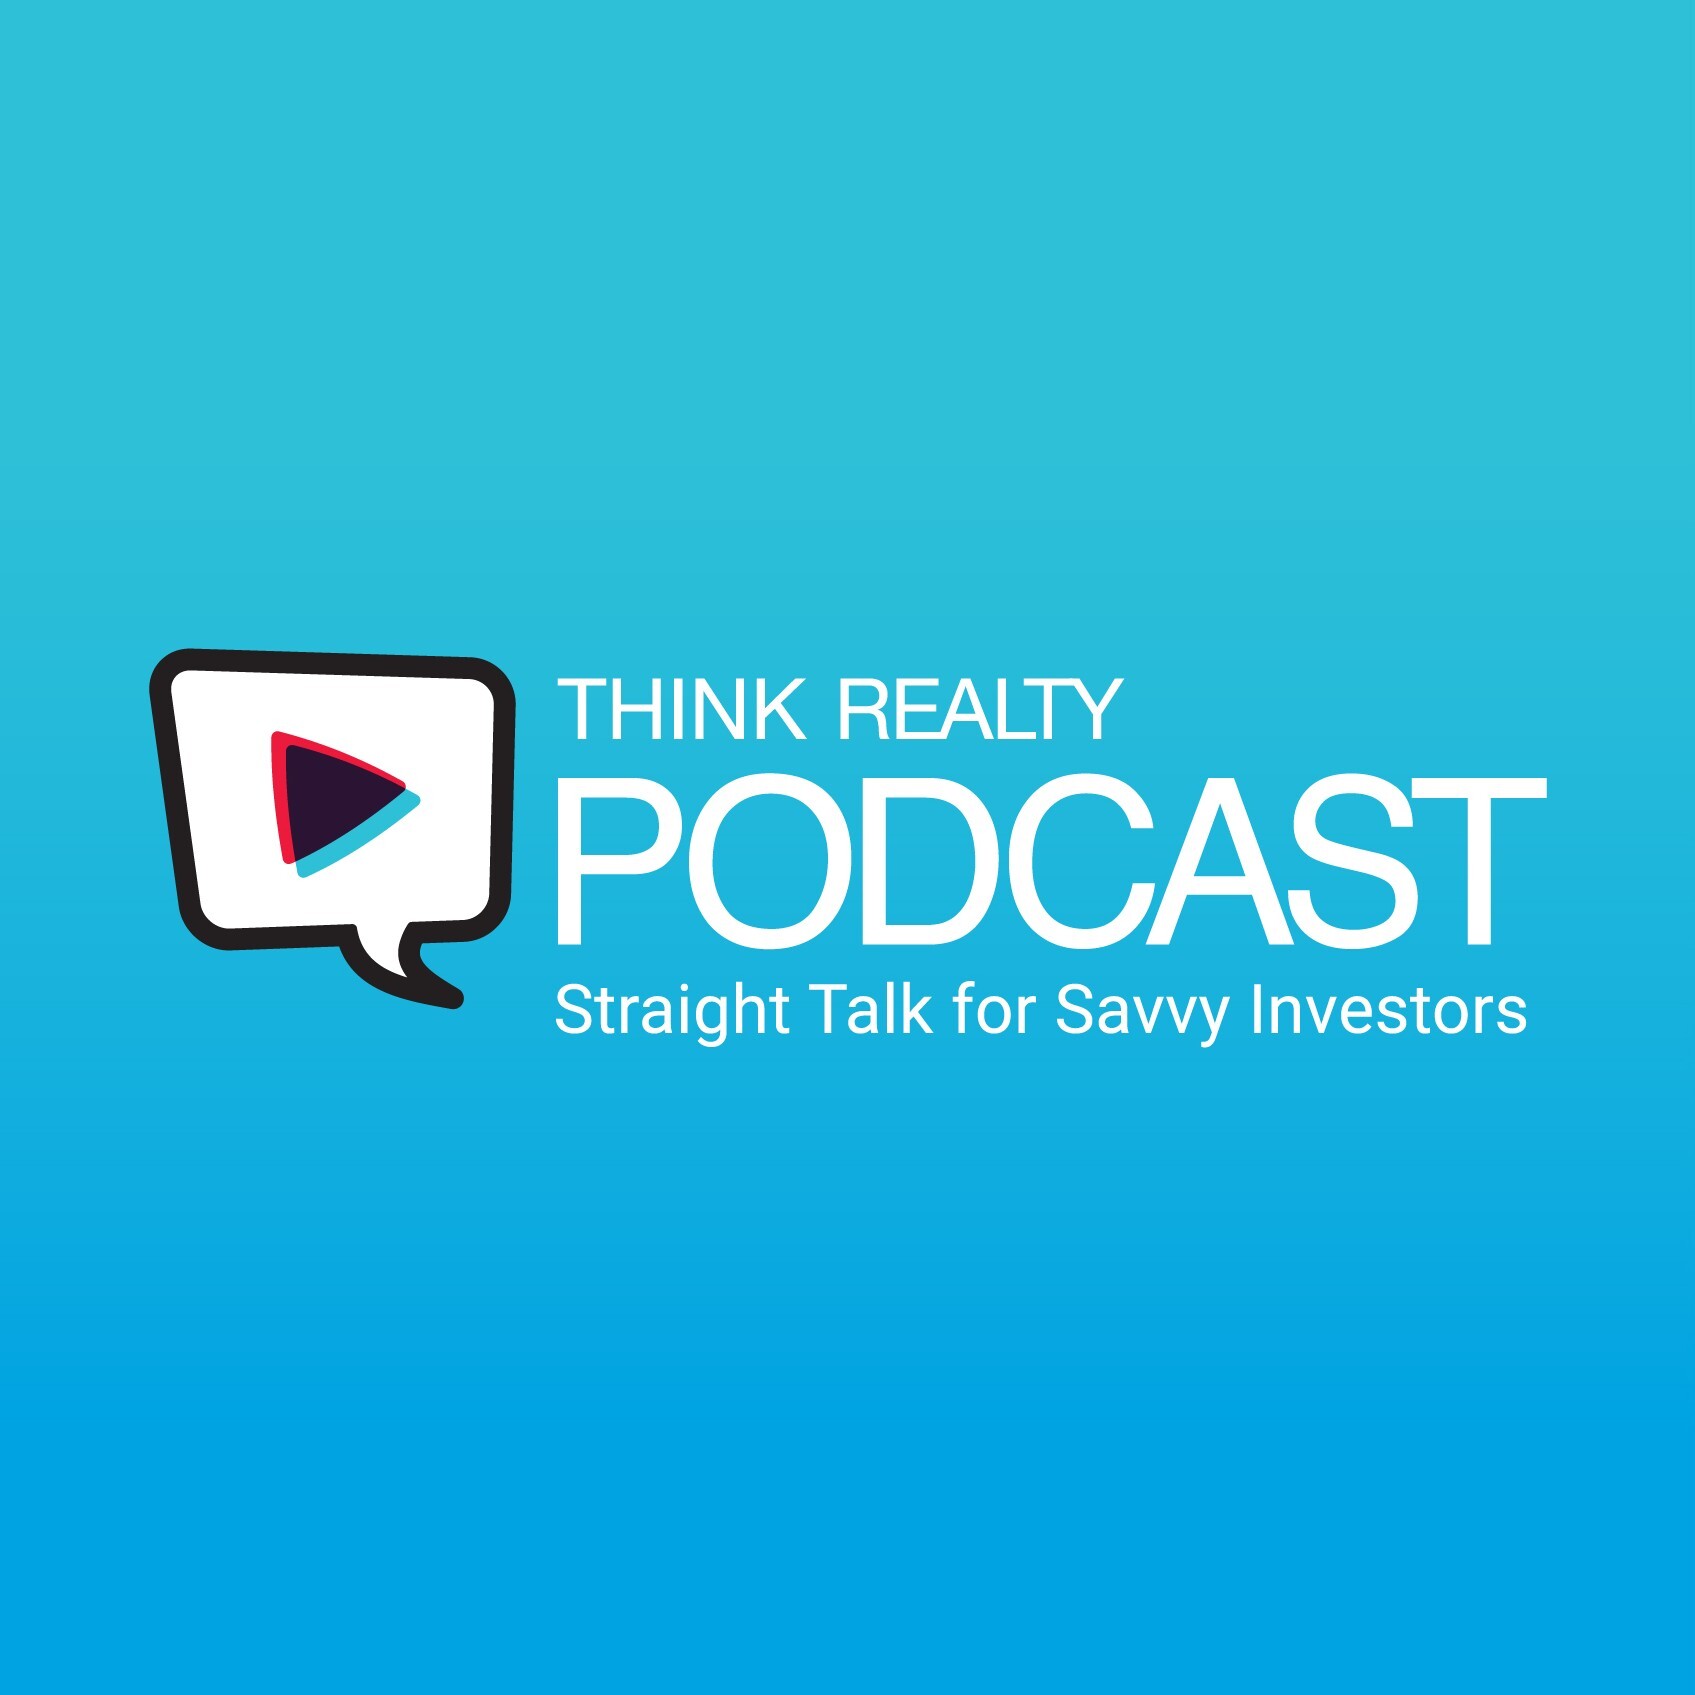 The Think Realty Podcast